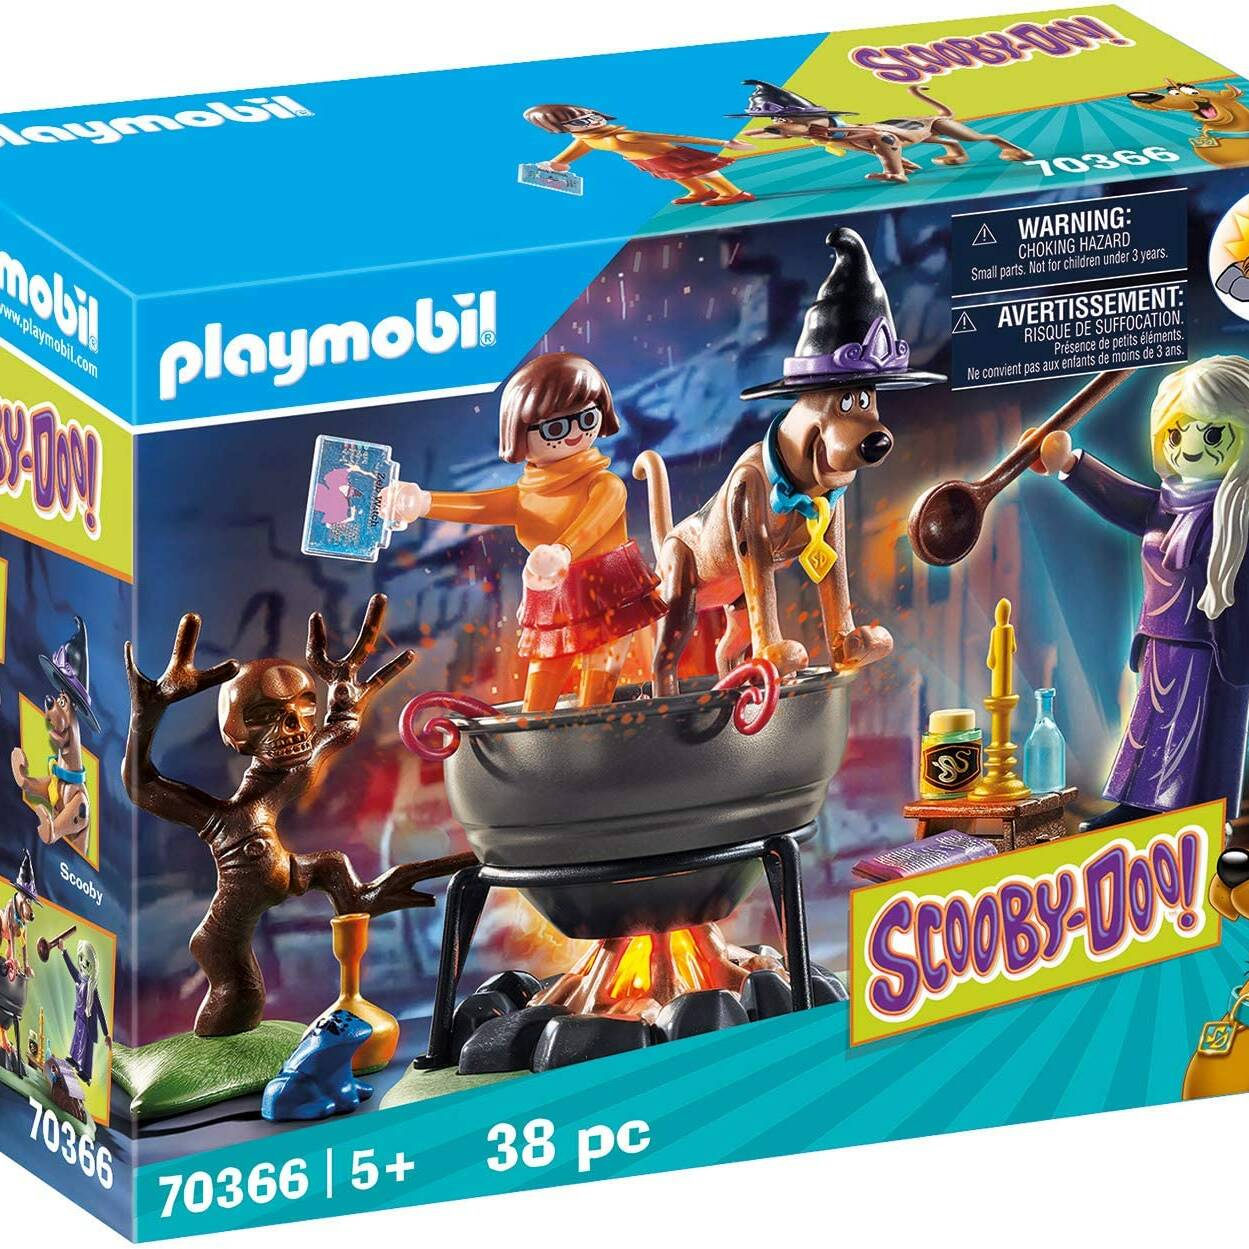 PLAYMOBIL 70366 SCOOBY DOO! ADVENTURE IN THE WITCH'S CAULDRON